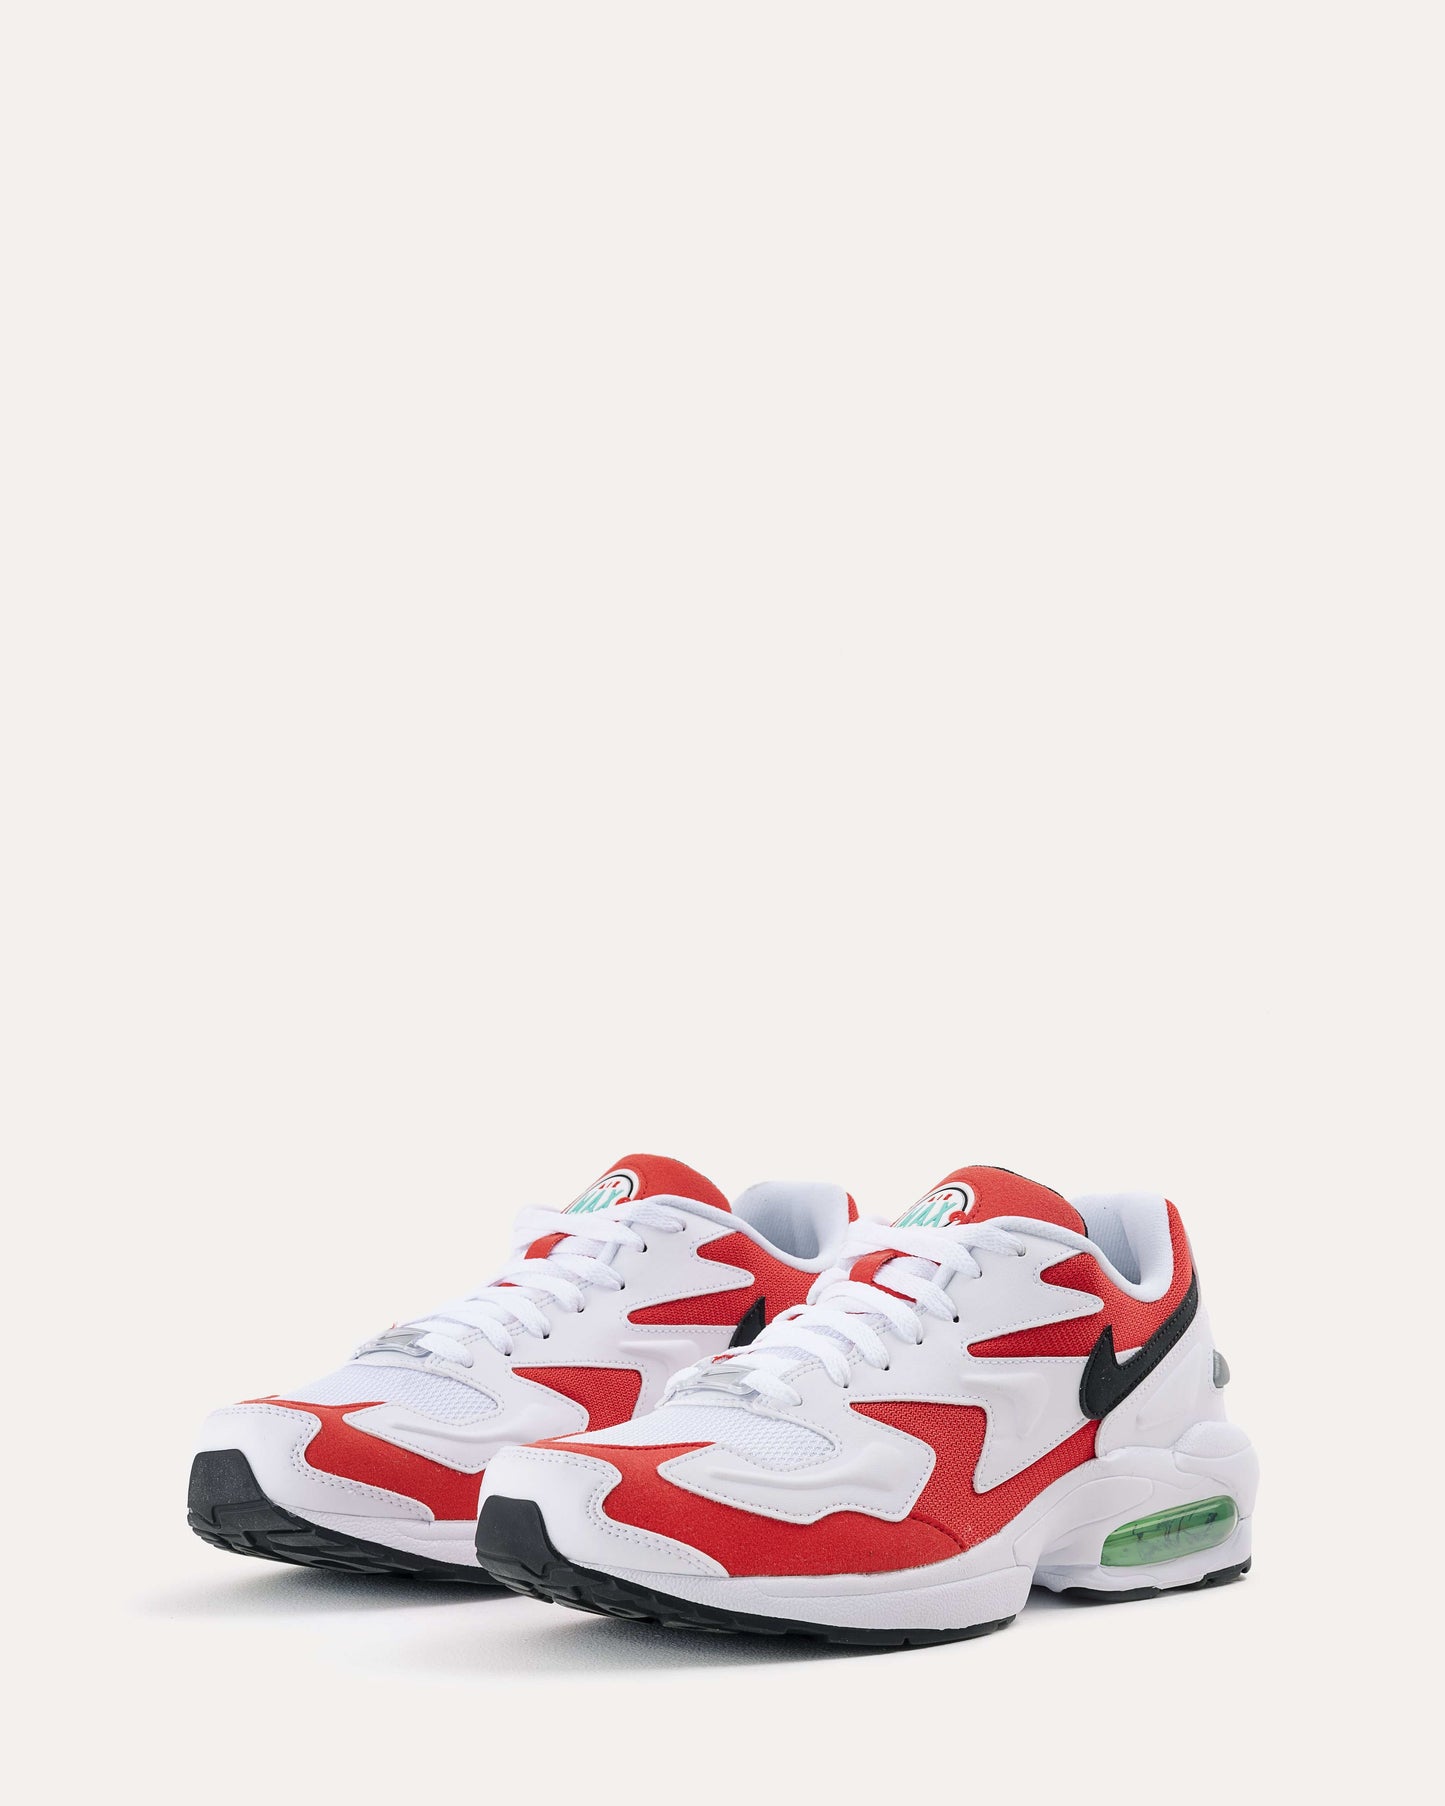 Nike Men's Sneakers Air Max2 Light in Red/White